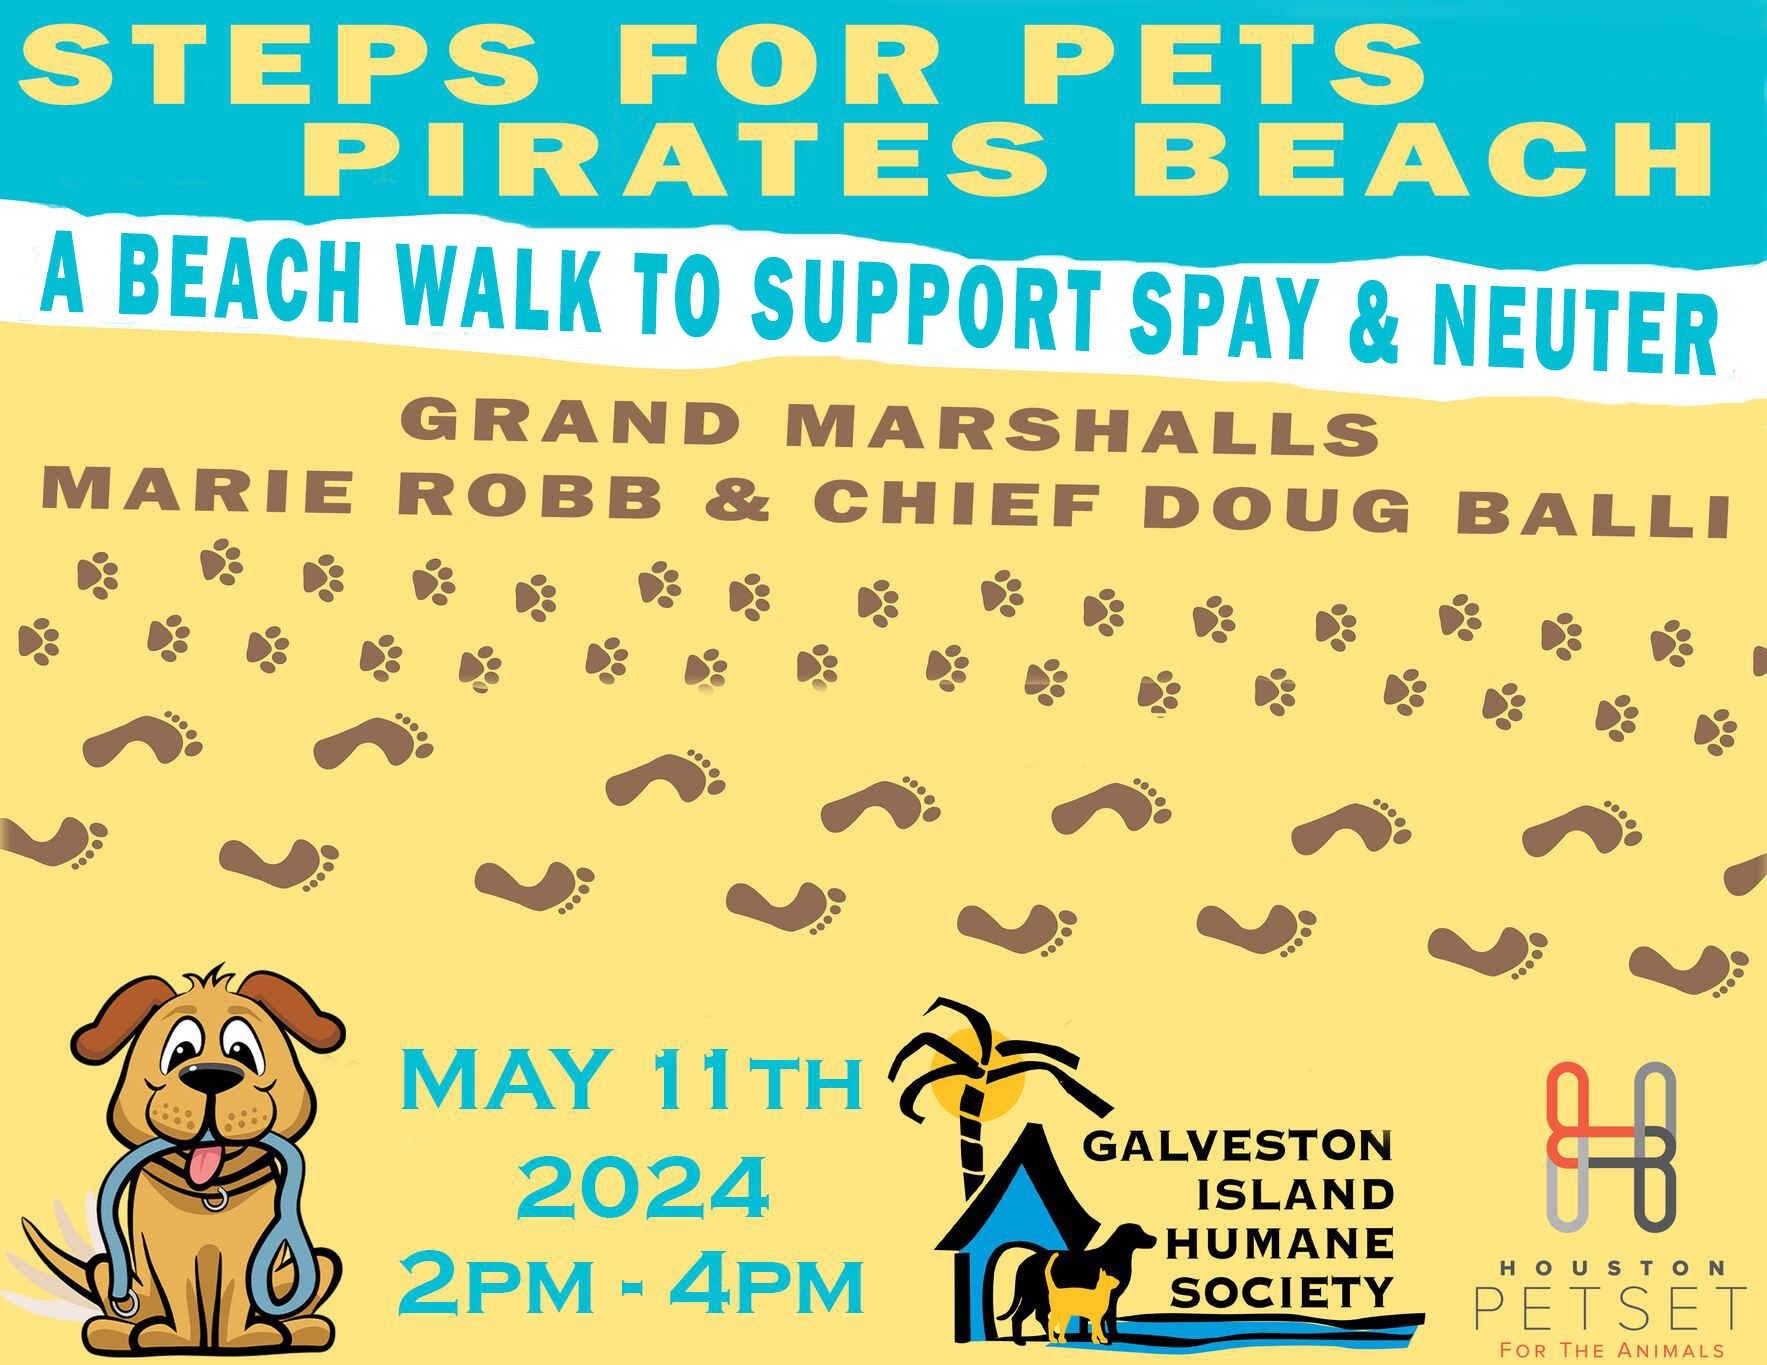 Calling all Sponsors! Our Steps for Pets - Pirates Beach dog walk is THIS SATURDAY! 

We still have a ways to go to meet our $10,000 goal for our Spay/Neuter programs and we are hoping you will step up and sponsor our Steps for Pets Campaign will the